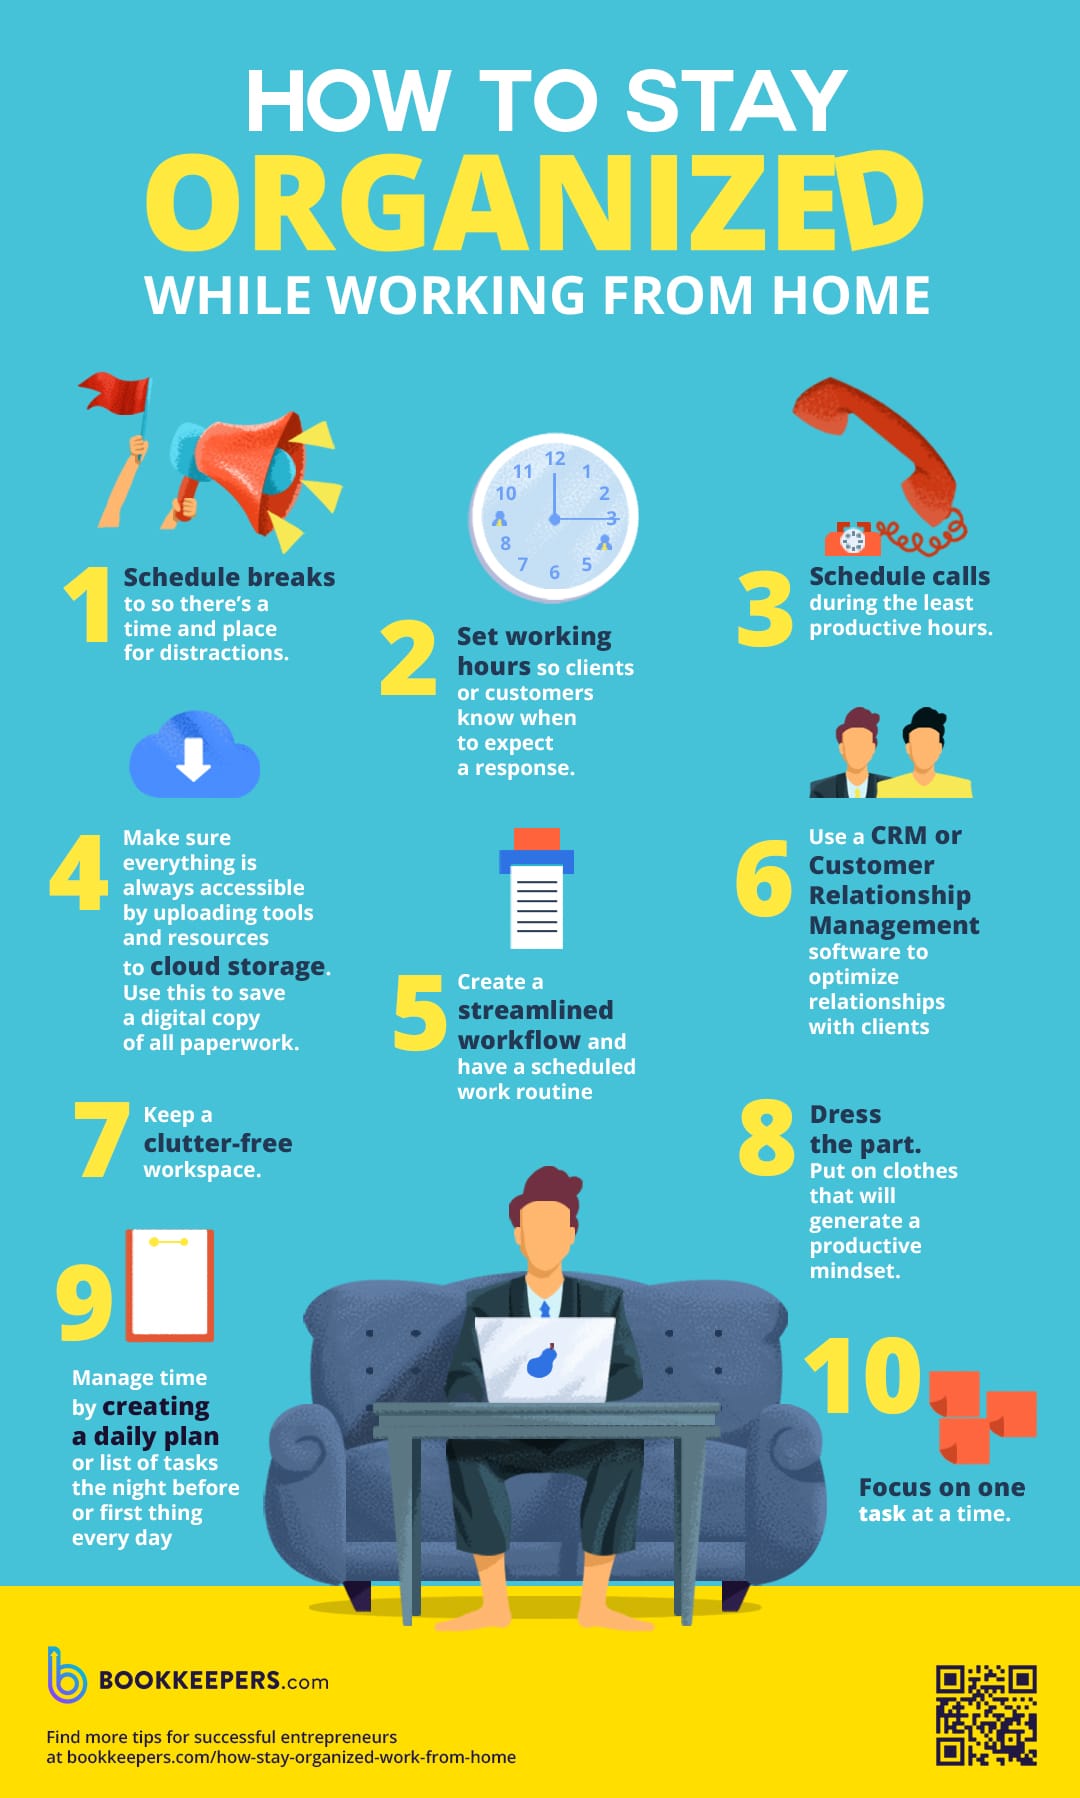 How To Stay Organized While Working From Home (11 Ways) [INFOGRAPHIC]